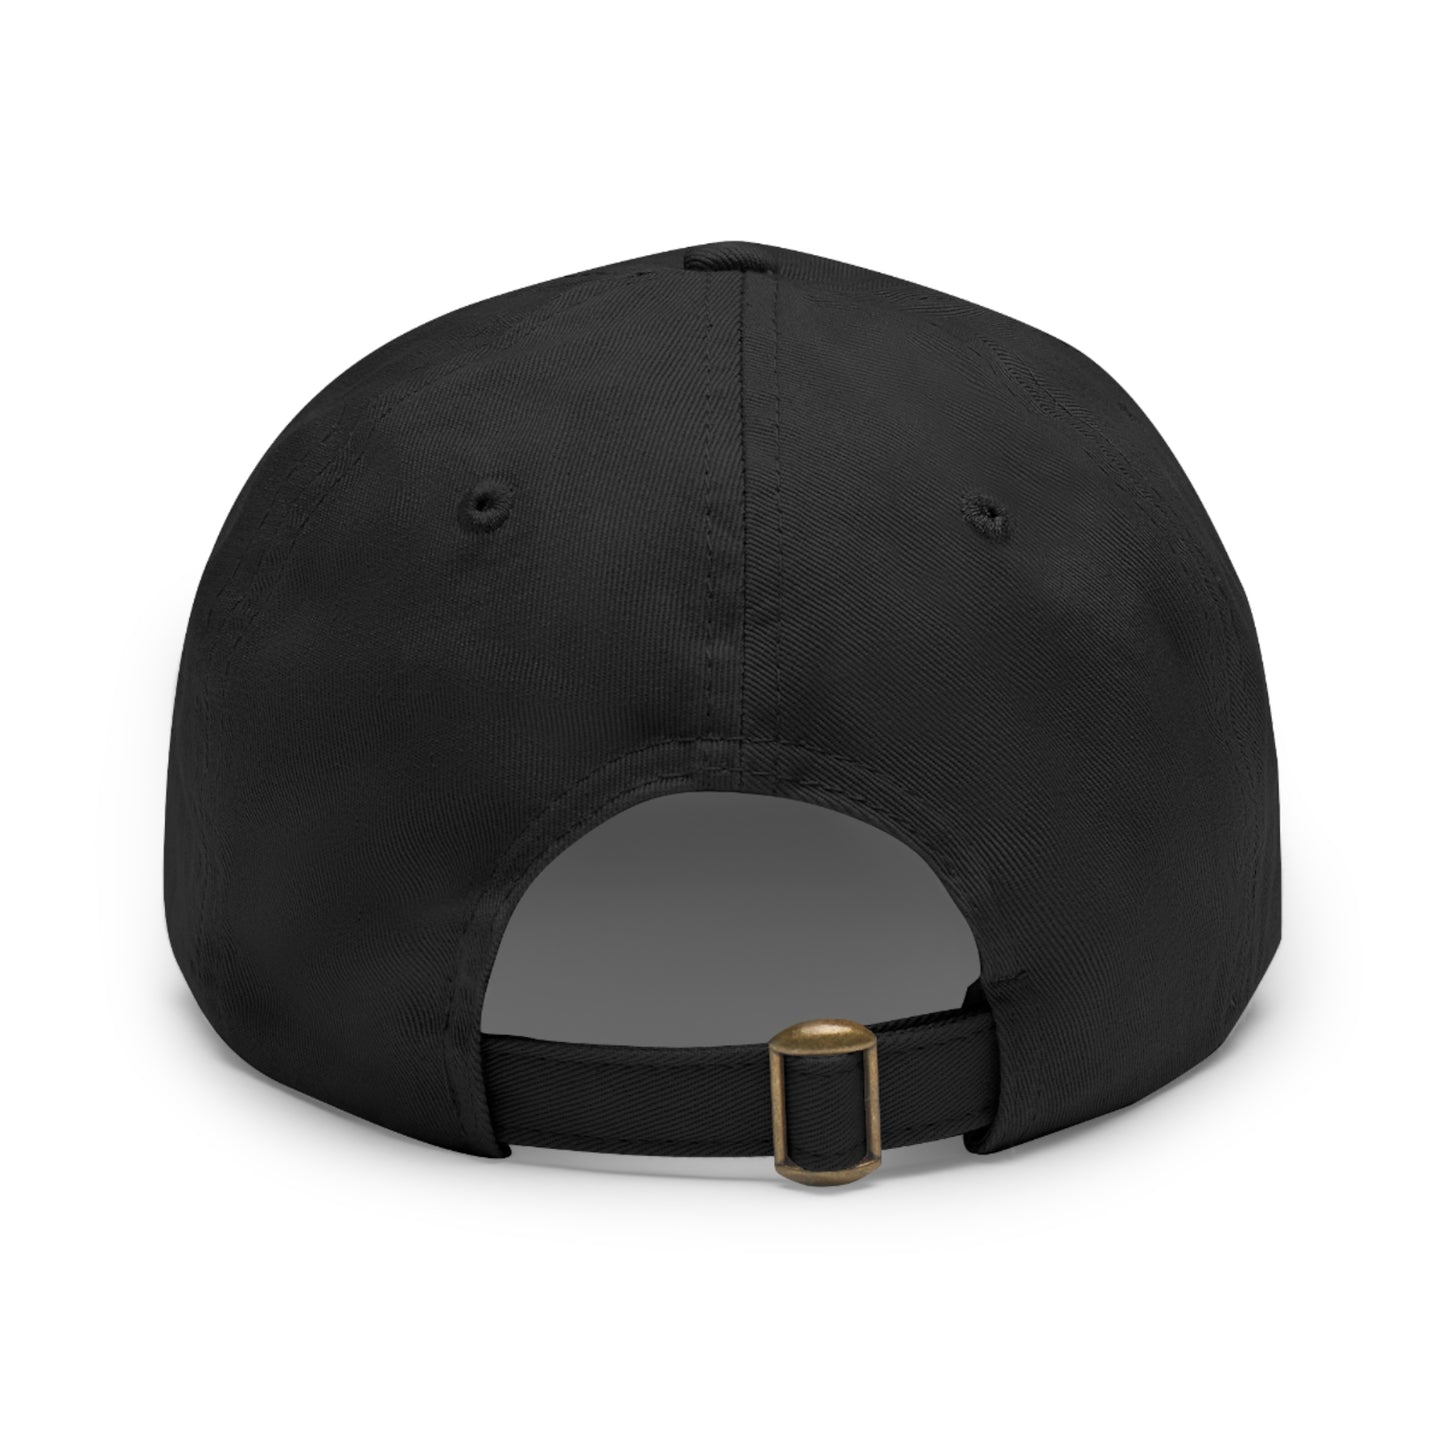 Christian Soldier Dad Hat with Leather emblem.